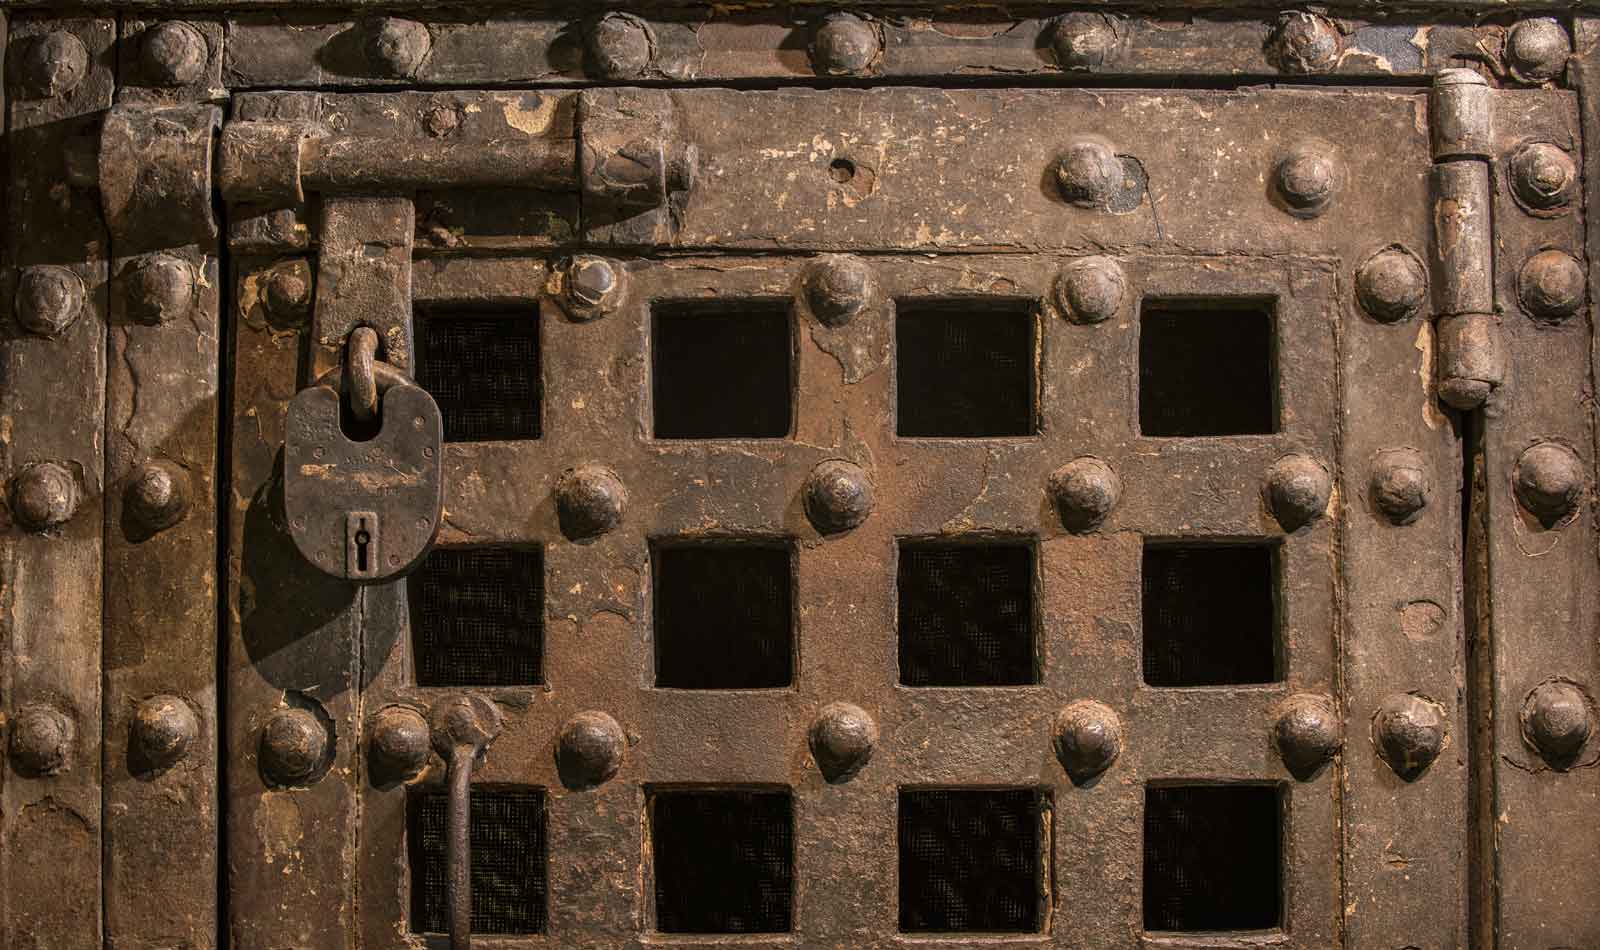 This heavy iron clad oak door comes from the inner courtyard where the prisoners exercised.